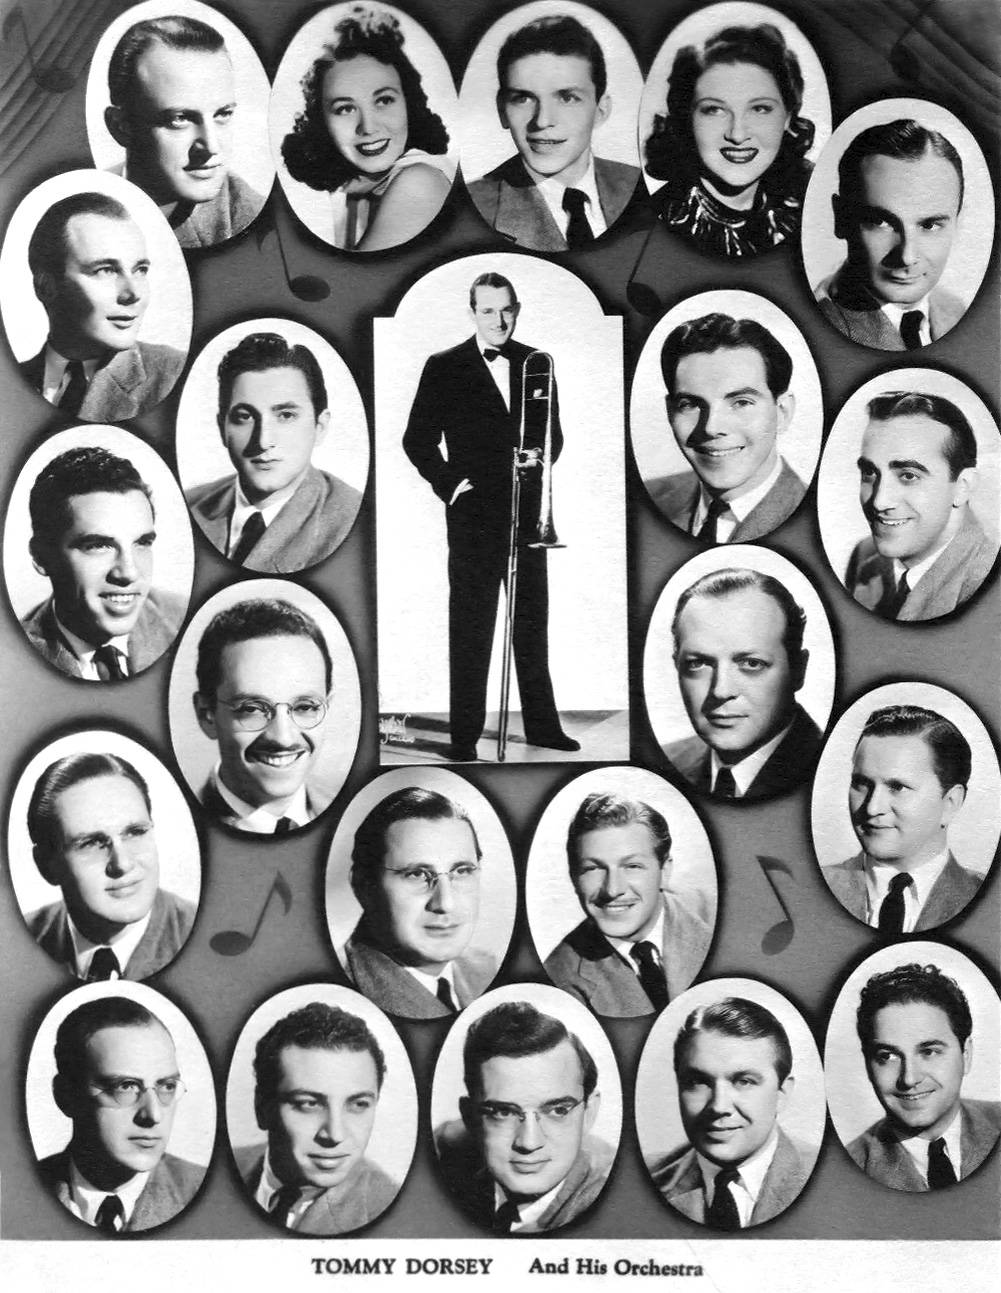 Caption: Tommy Dorsey and His Orchestra in Performance Wallpaper